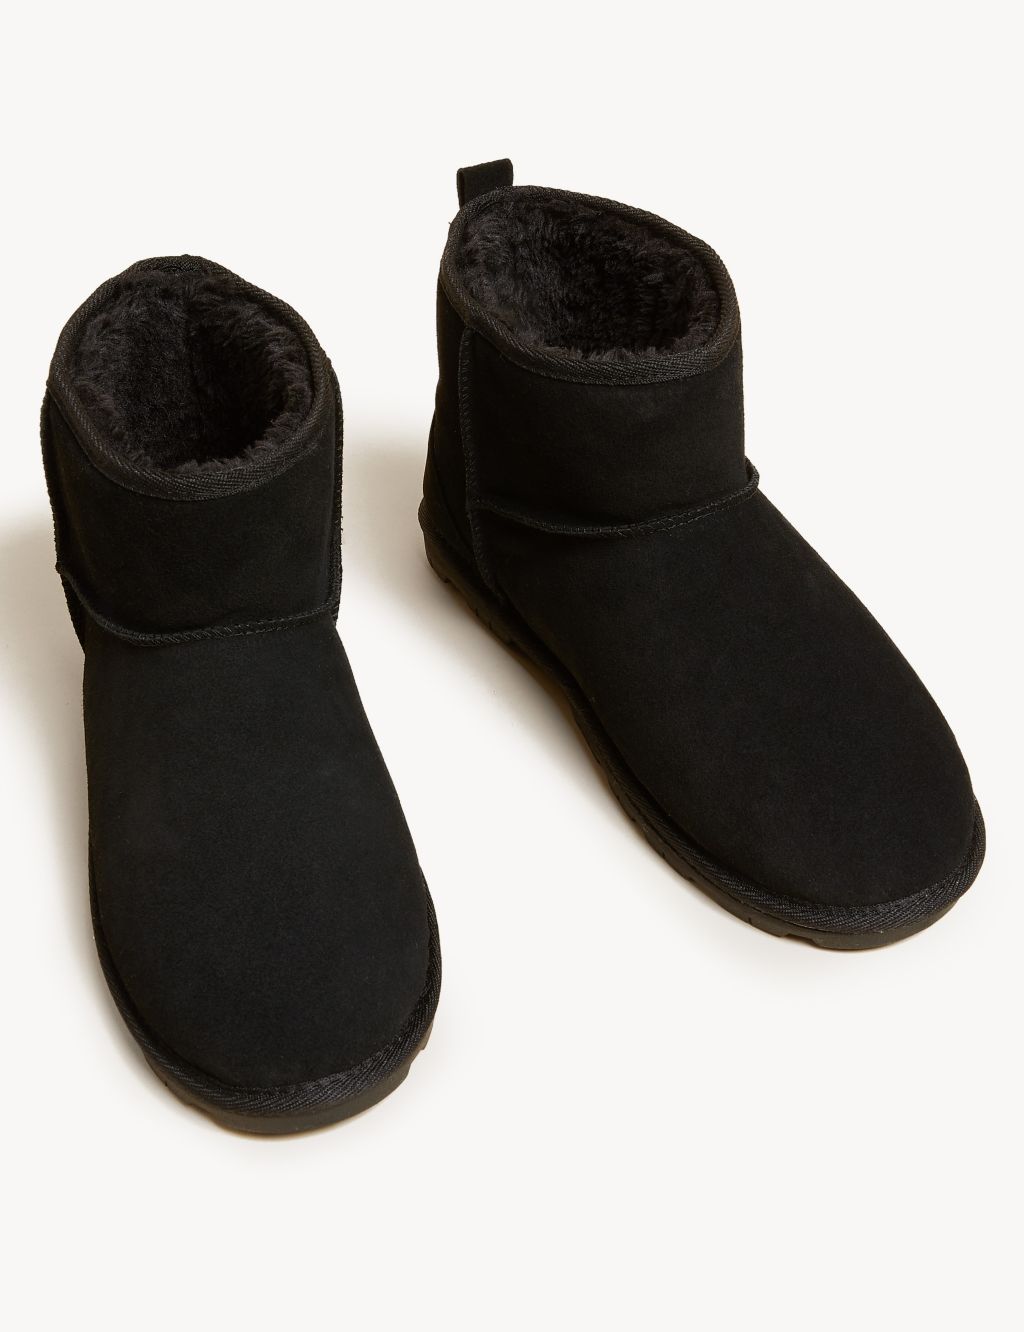 Suede Slipper Boots image 2